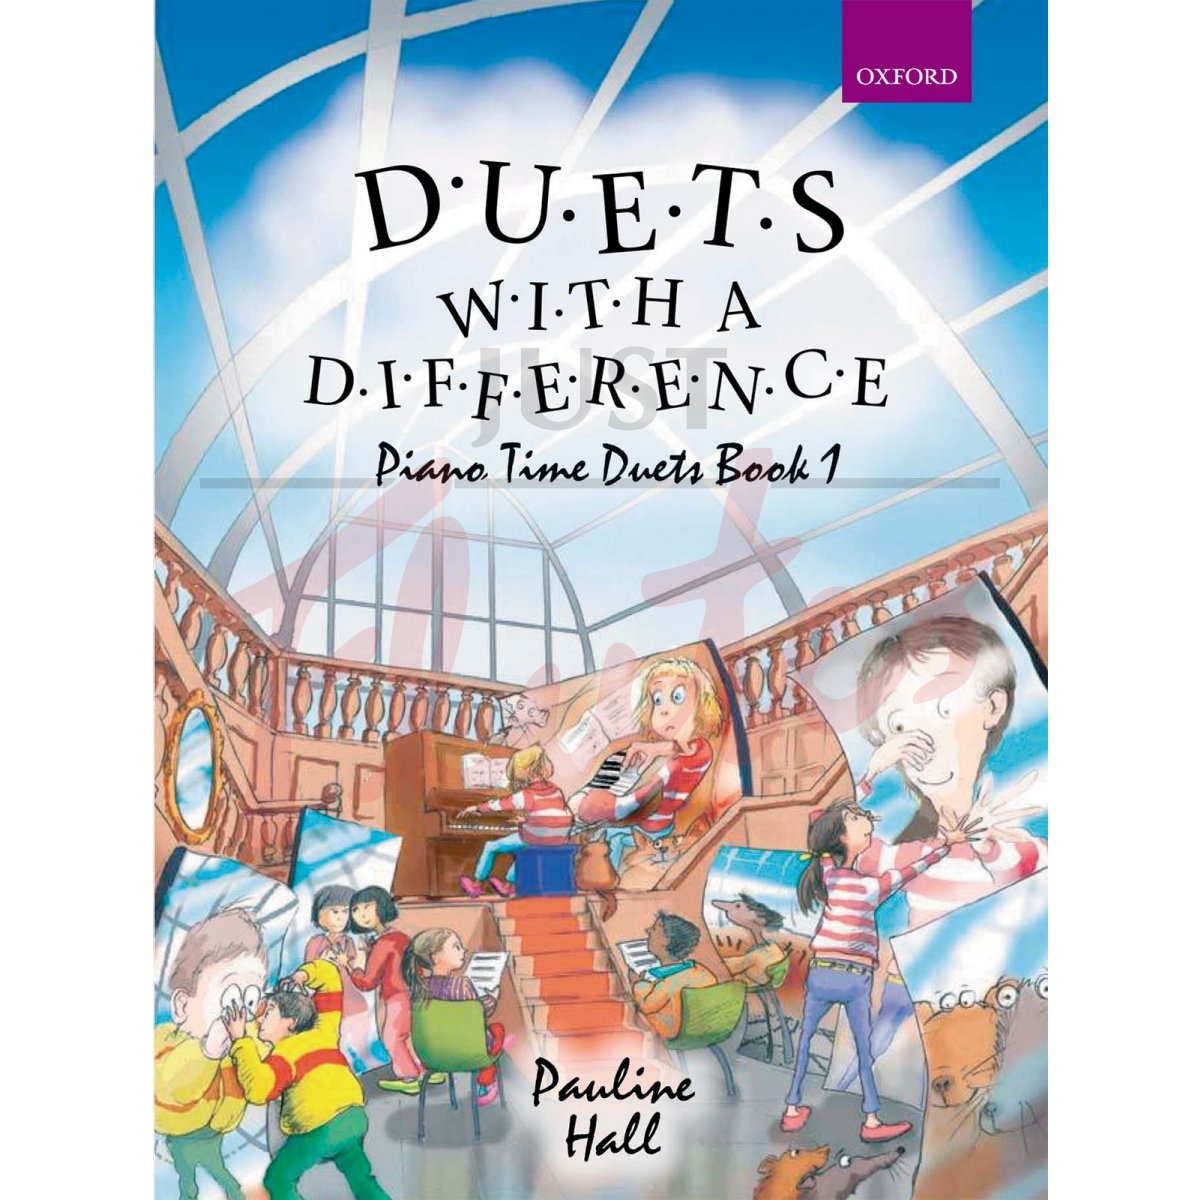 Duets With A Difference - Piano Time Duets Book 1